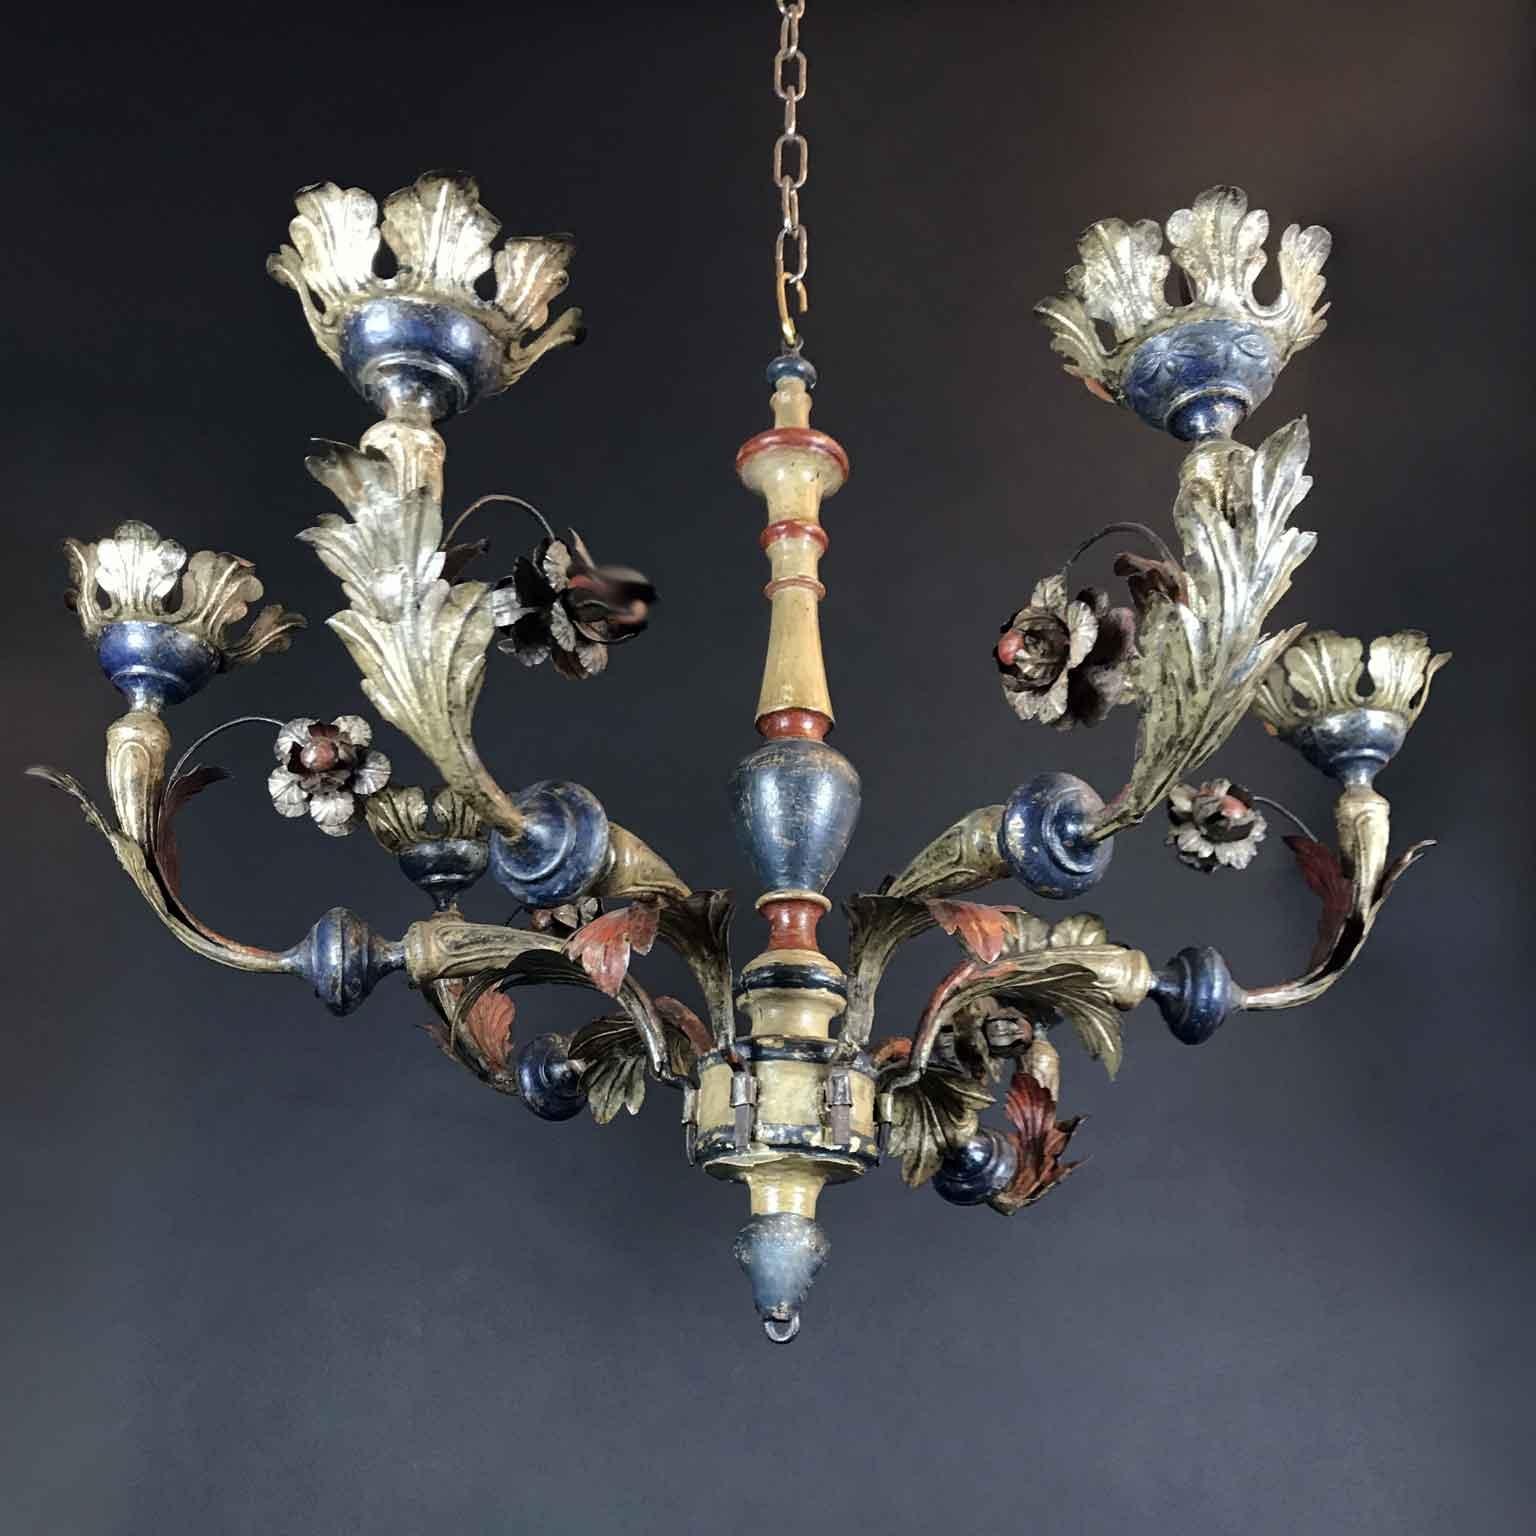 Antique fashinating circular chandelier realized for candle lighting, han-made in Italy in embossed leaf shaped iron tole with a central ivory, blue and red color painted wood stem decorated with six curved arms in embossed silver-leaf tole with red